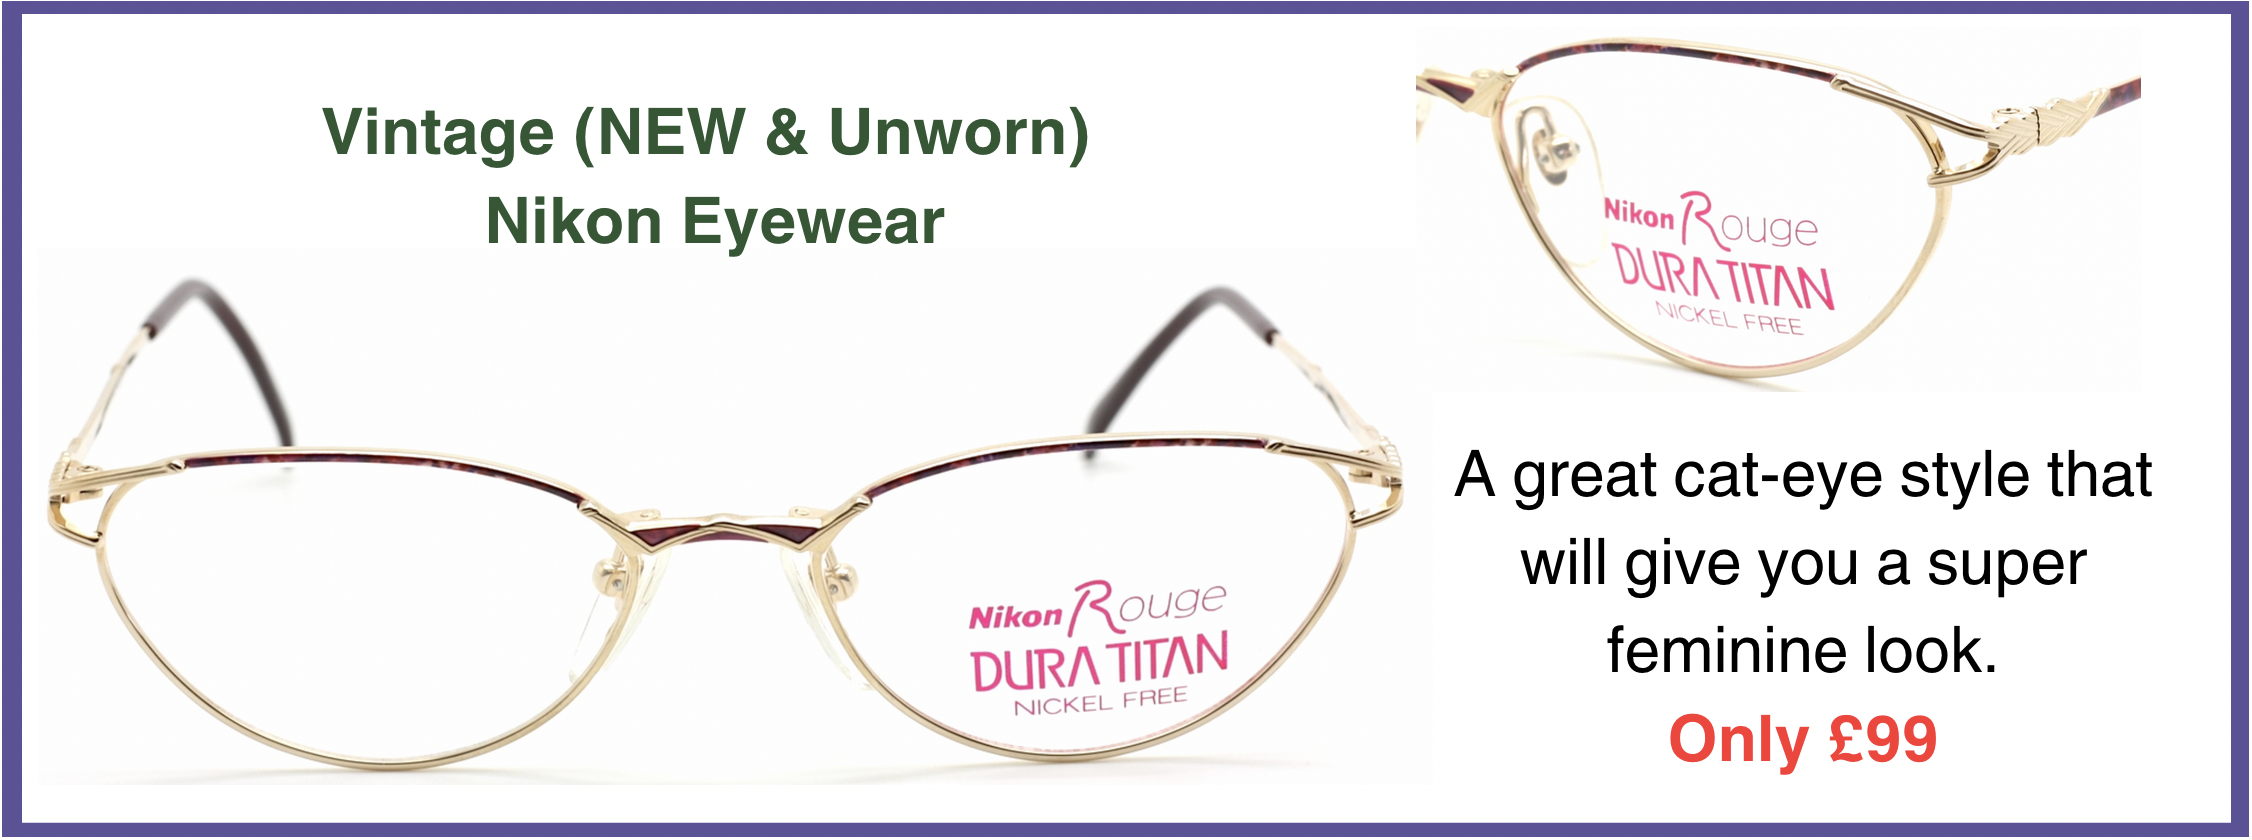 Vintage Nikon 6352 cat eye style prescription glasses in a gold and pink finish - stunning!